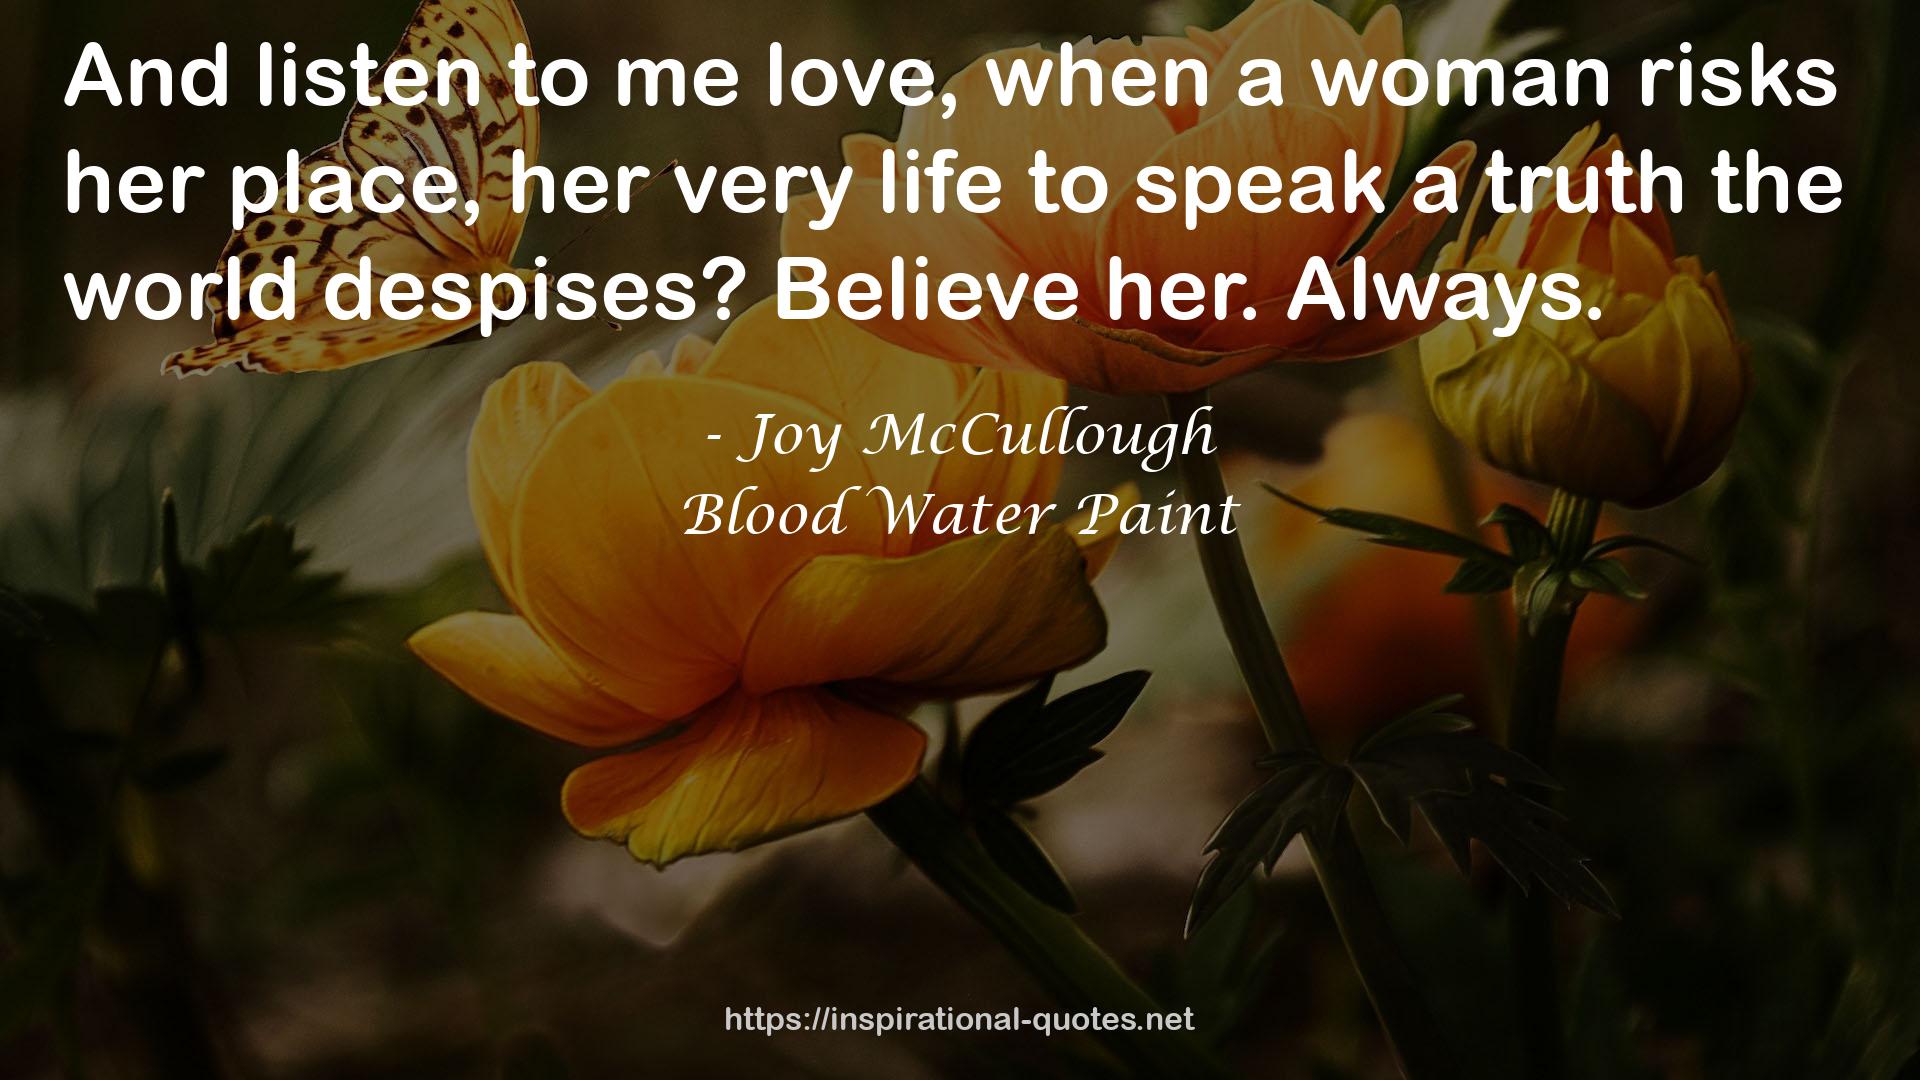 Blood Water Paint QUOTES